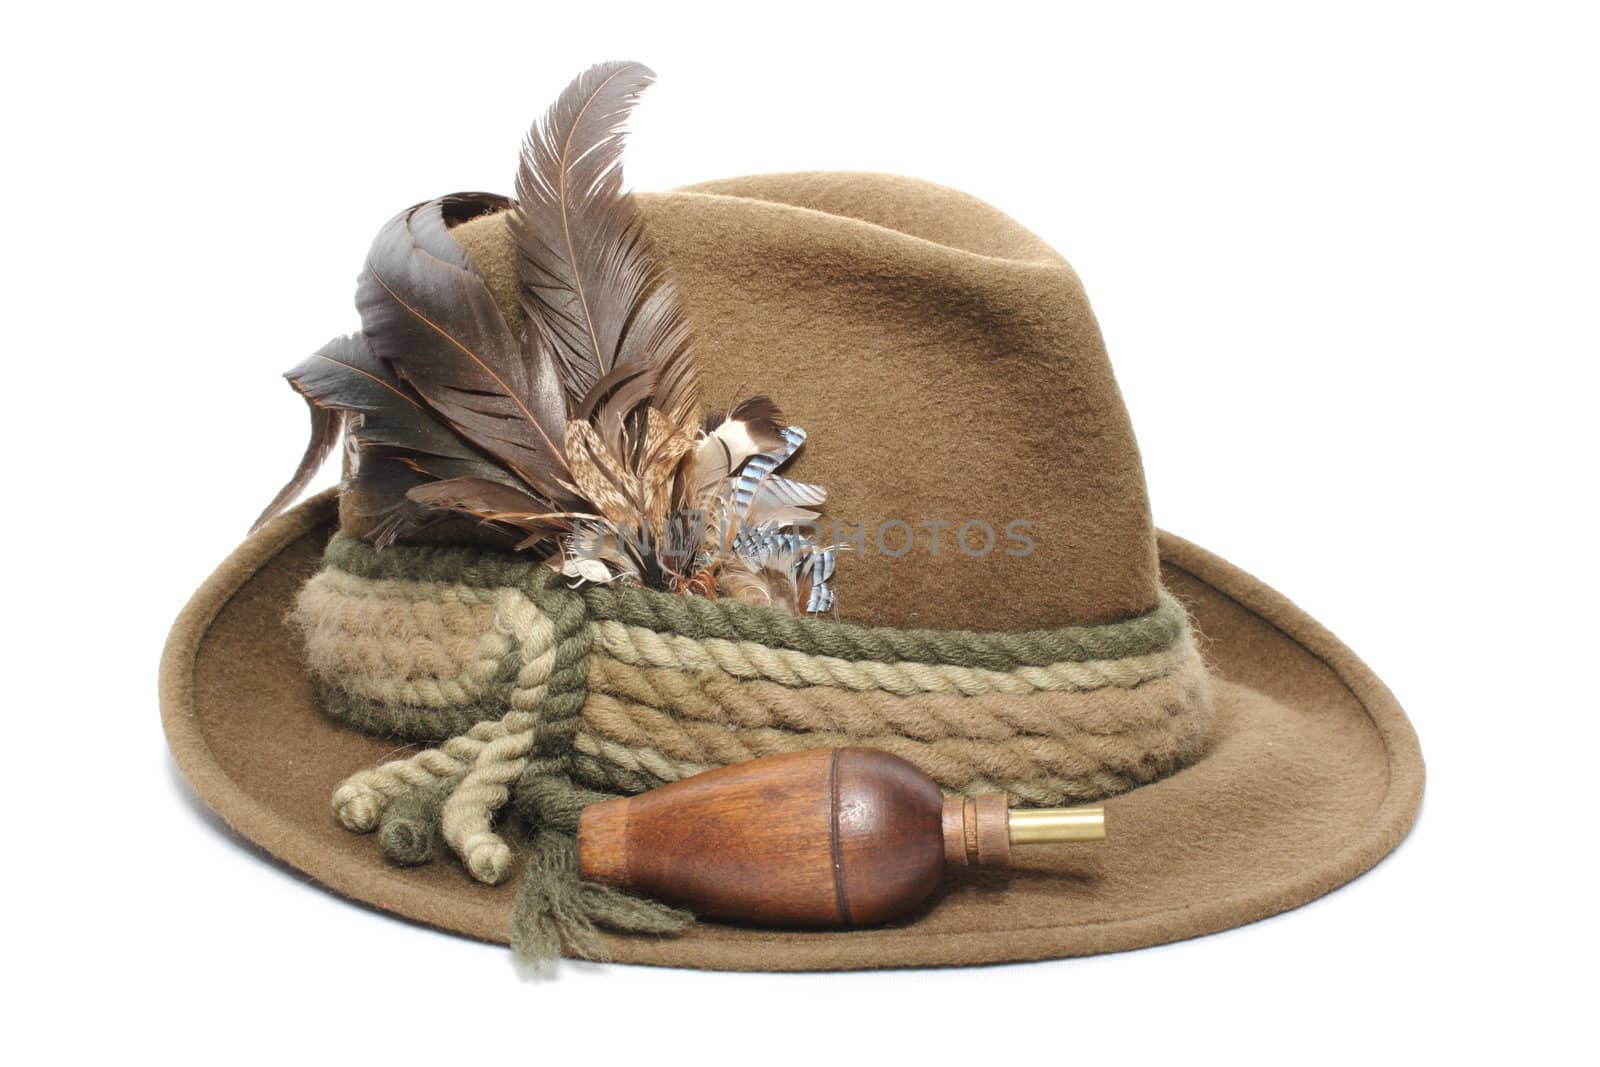 hunting gear - old traditional wool hat and game call for foxes